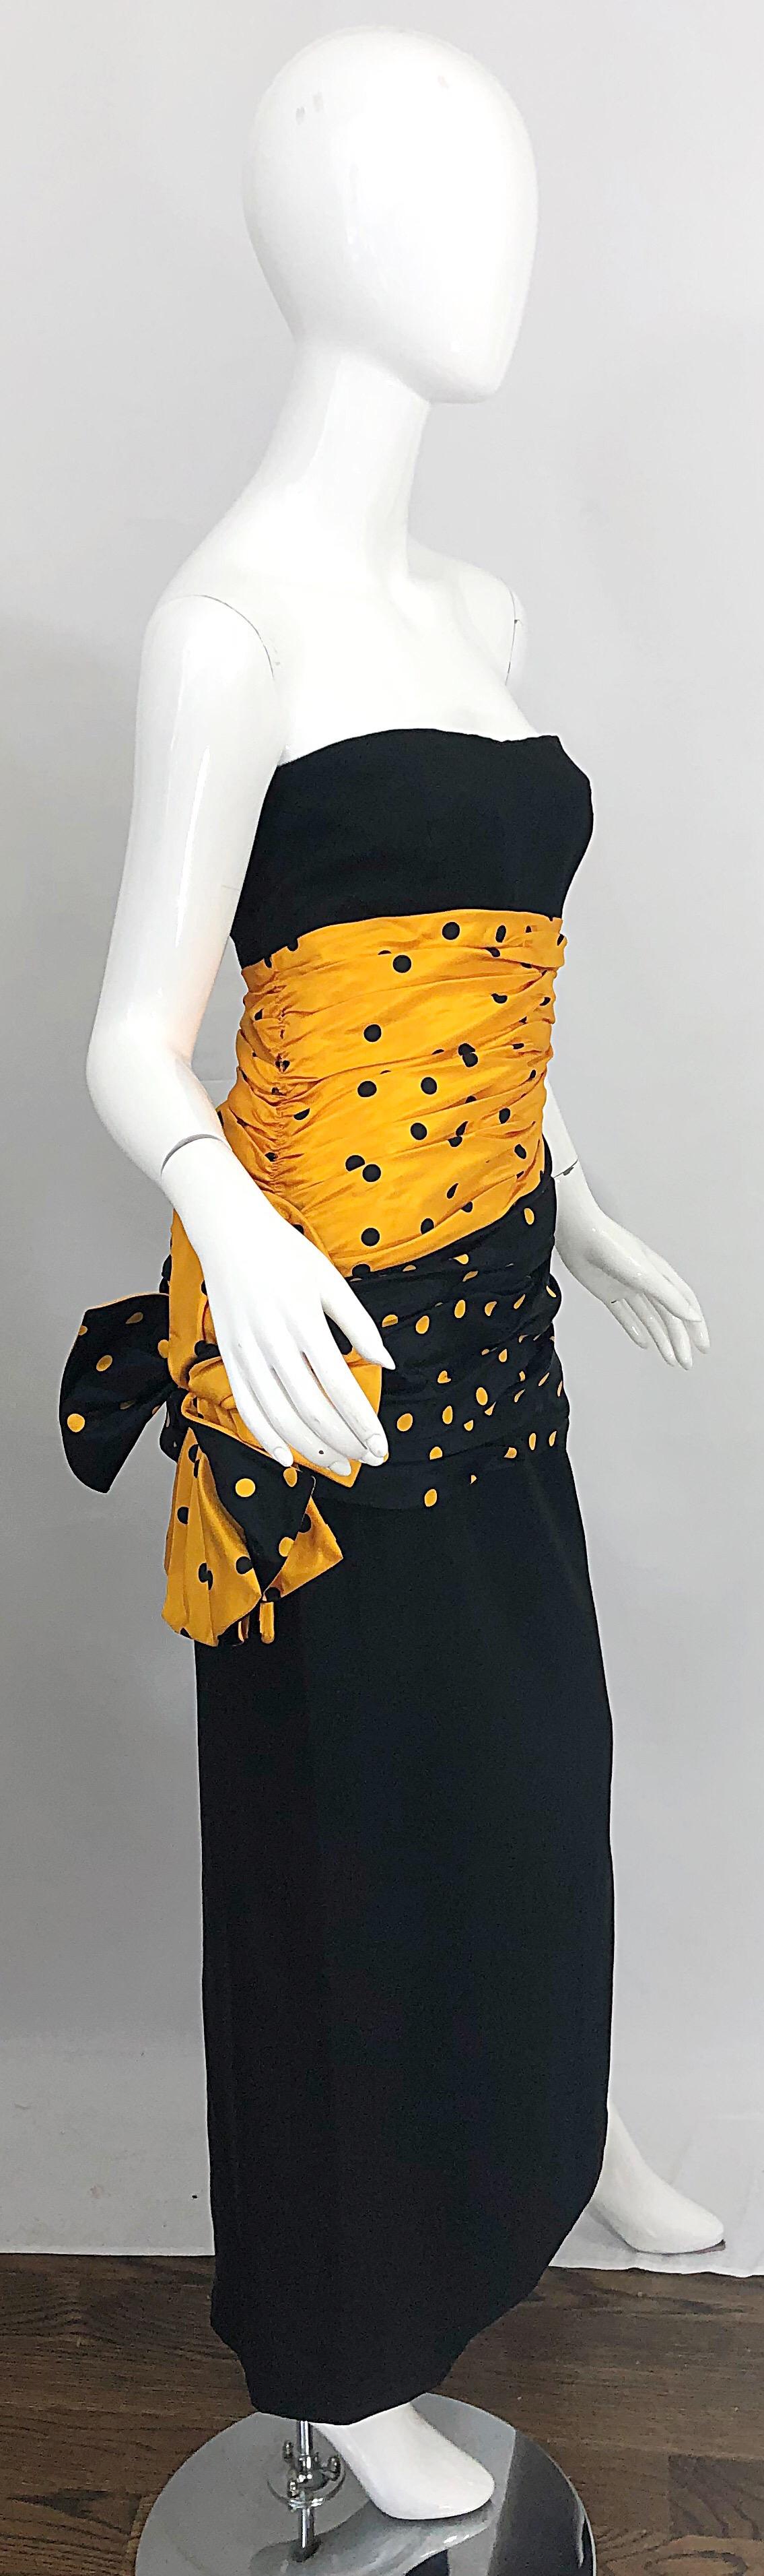 Gorgeous Avant Garde NINA RICCI Haute Couture 80s black and marigold polka dot strapless evening gown! Features a unique, yet brilliant fabric blend of Irish linen, rayon and silk taffeta. Interior boning on bodice holds everything in place, along